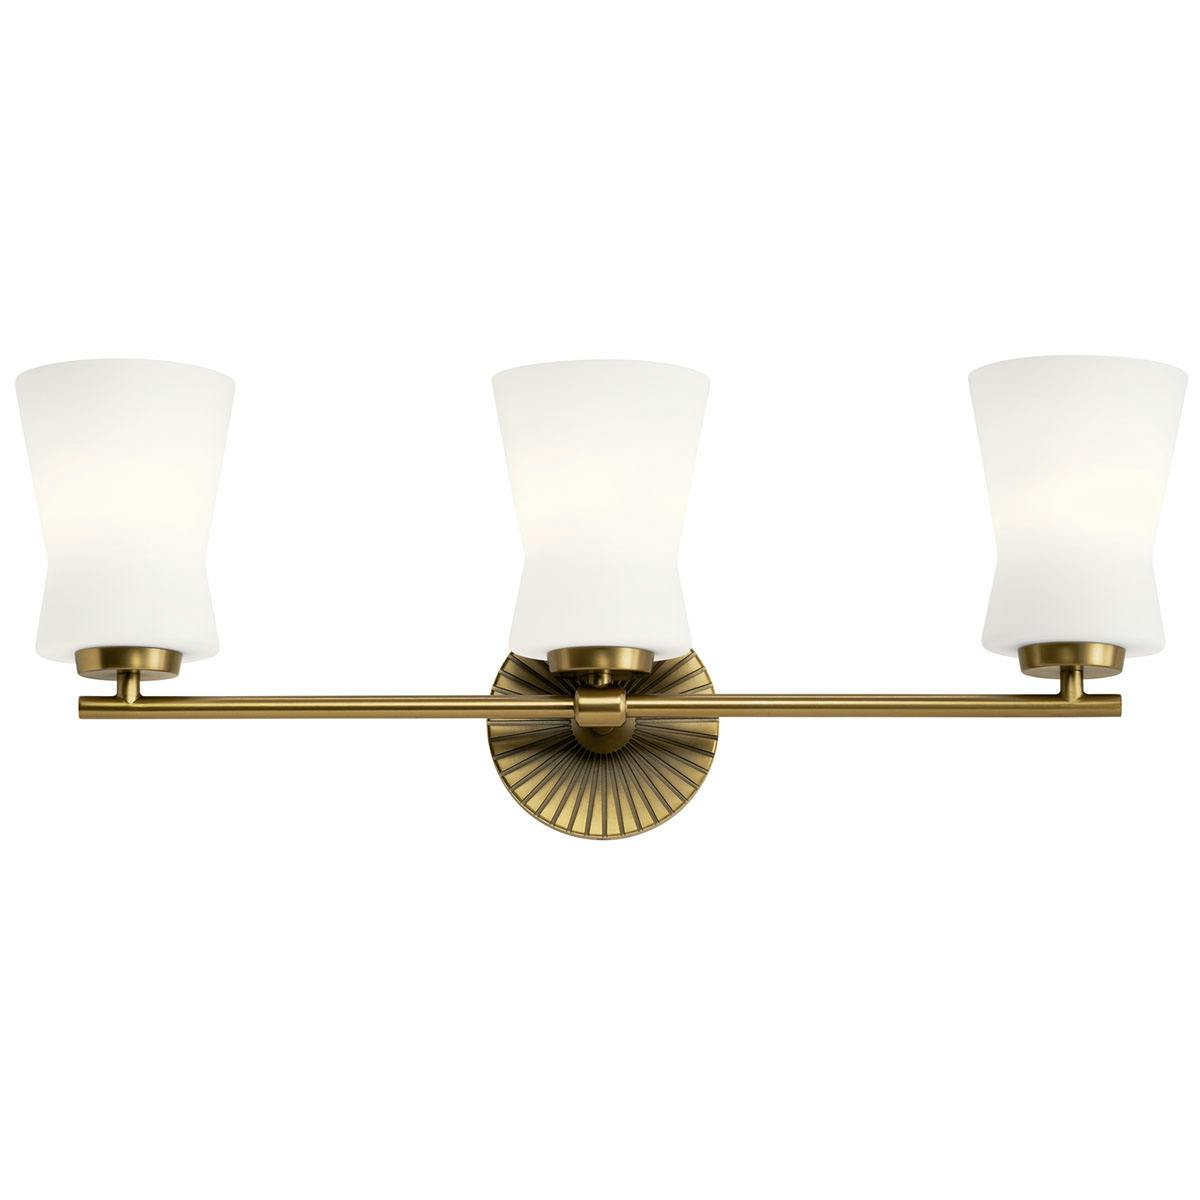 Front view of the Brianne 24.5" Vanity Light Brass on a white background